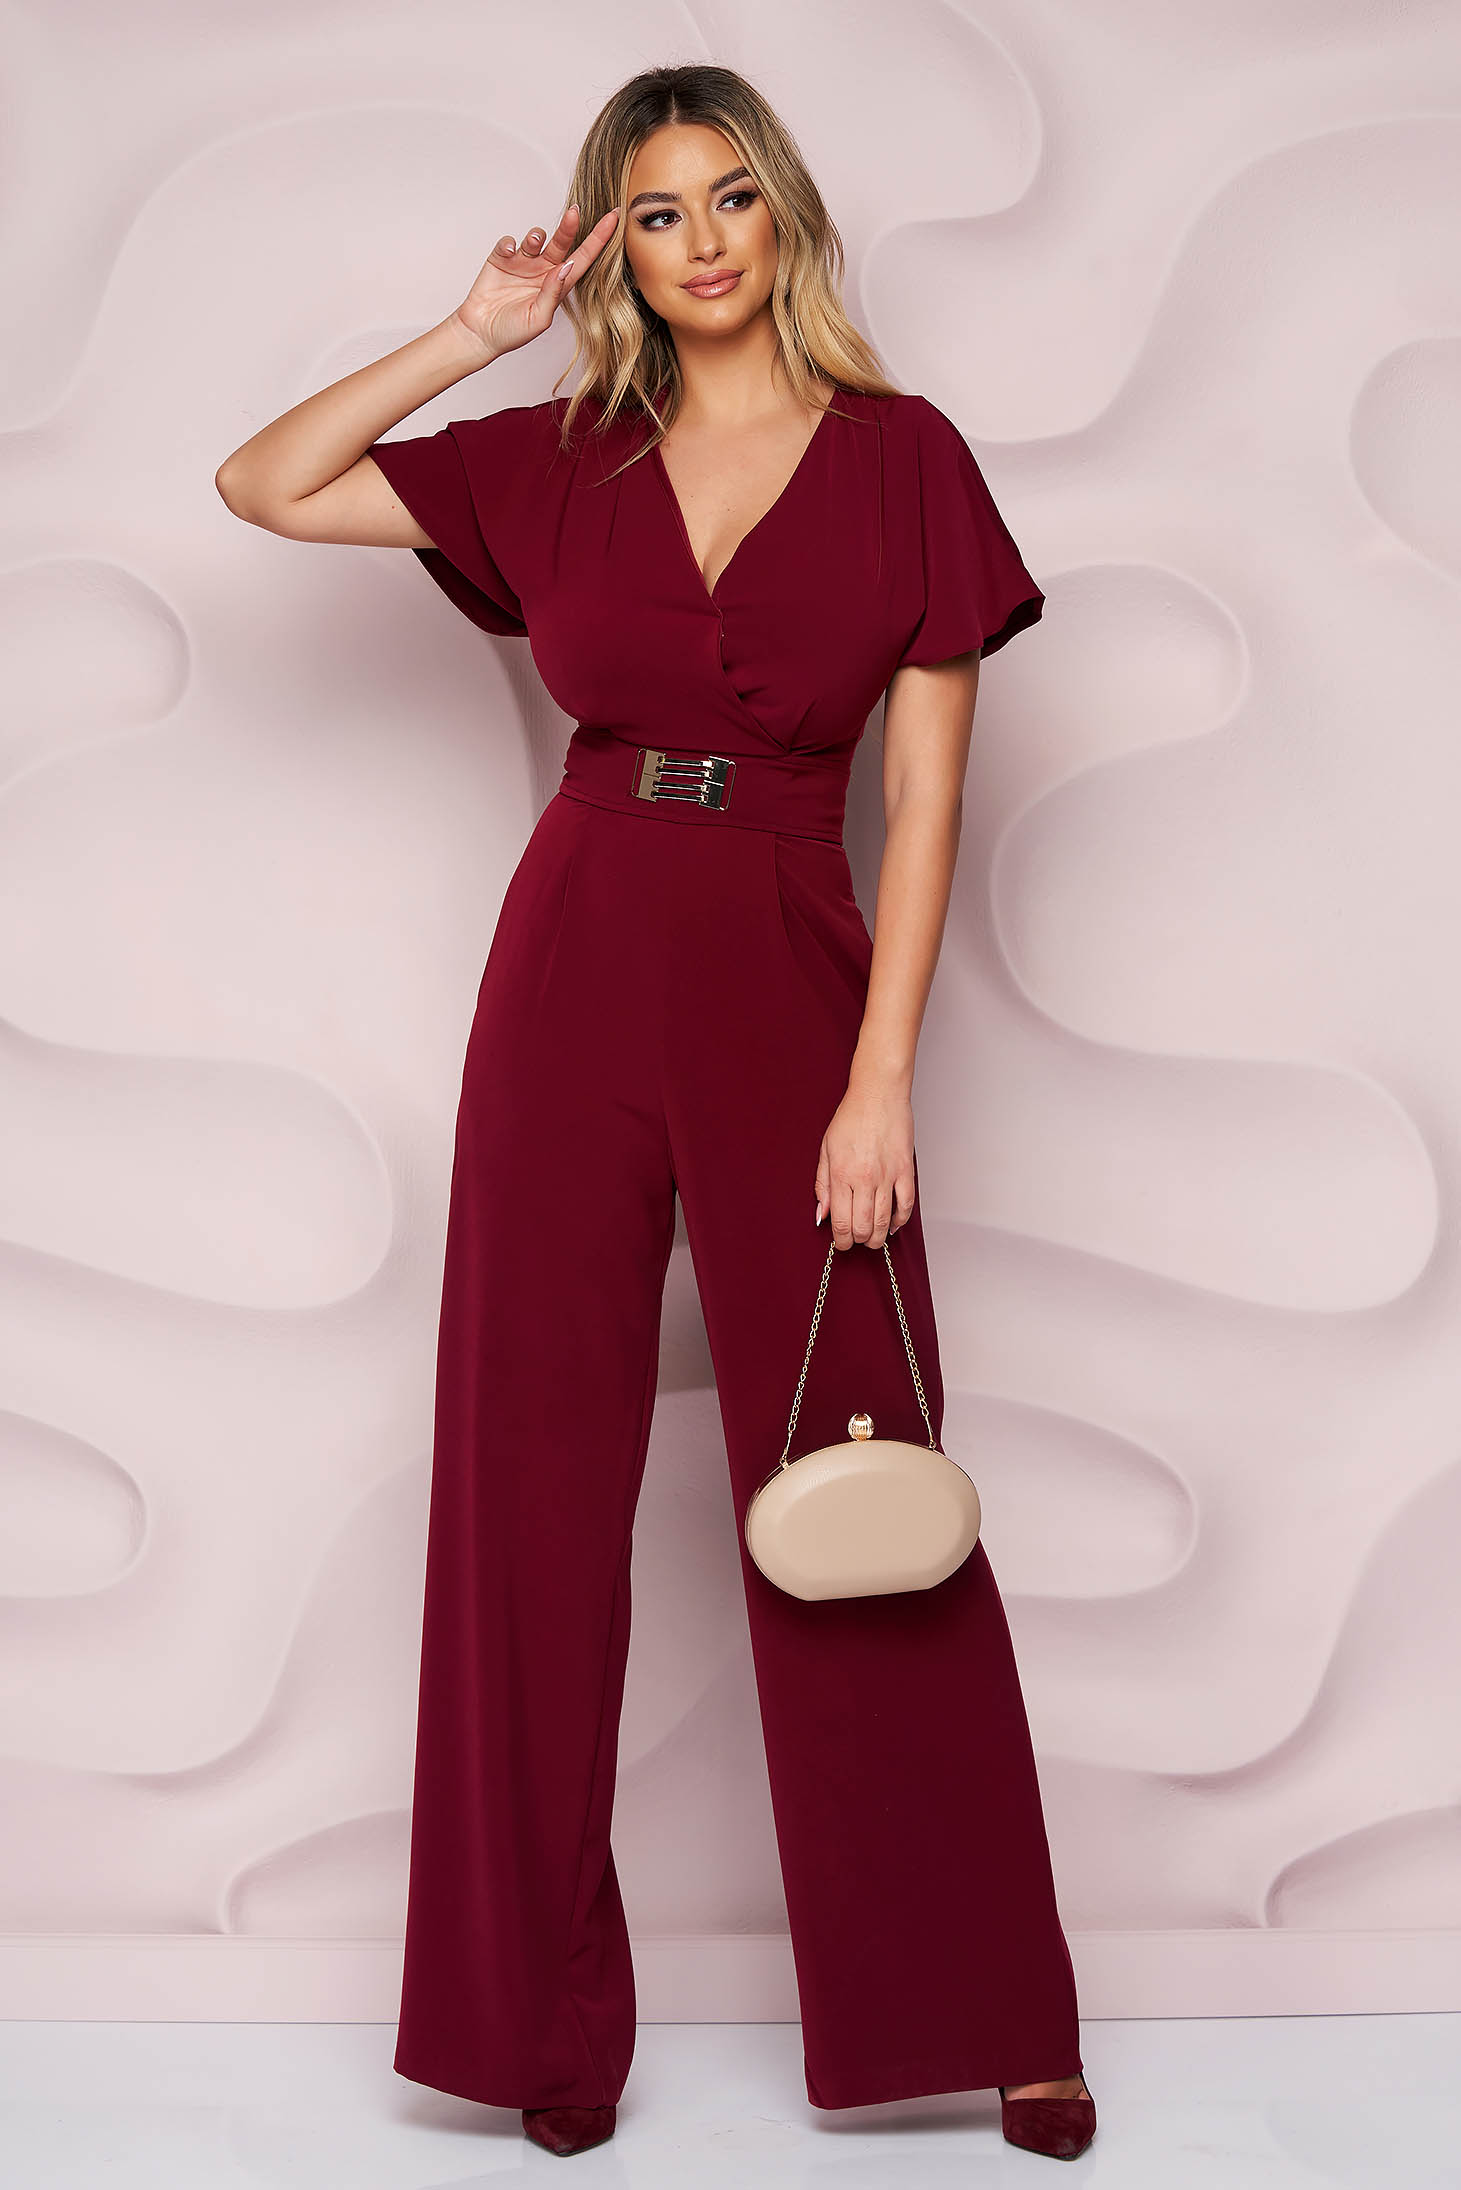 StarShinerS burgundy jumpsuit occasional loose fit lateral pockets nonelastic fabric soft fabric metallic buckle